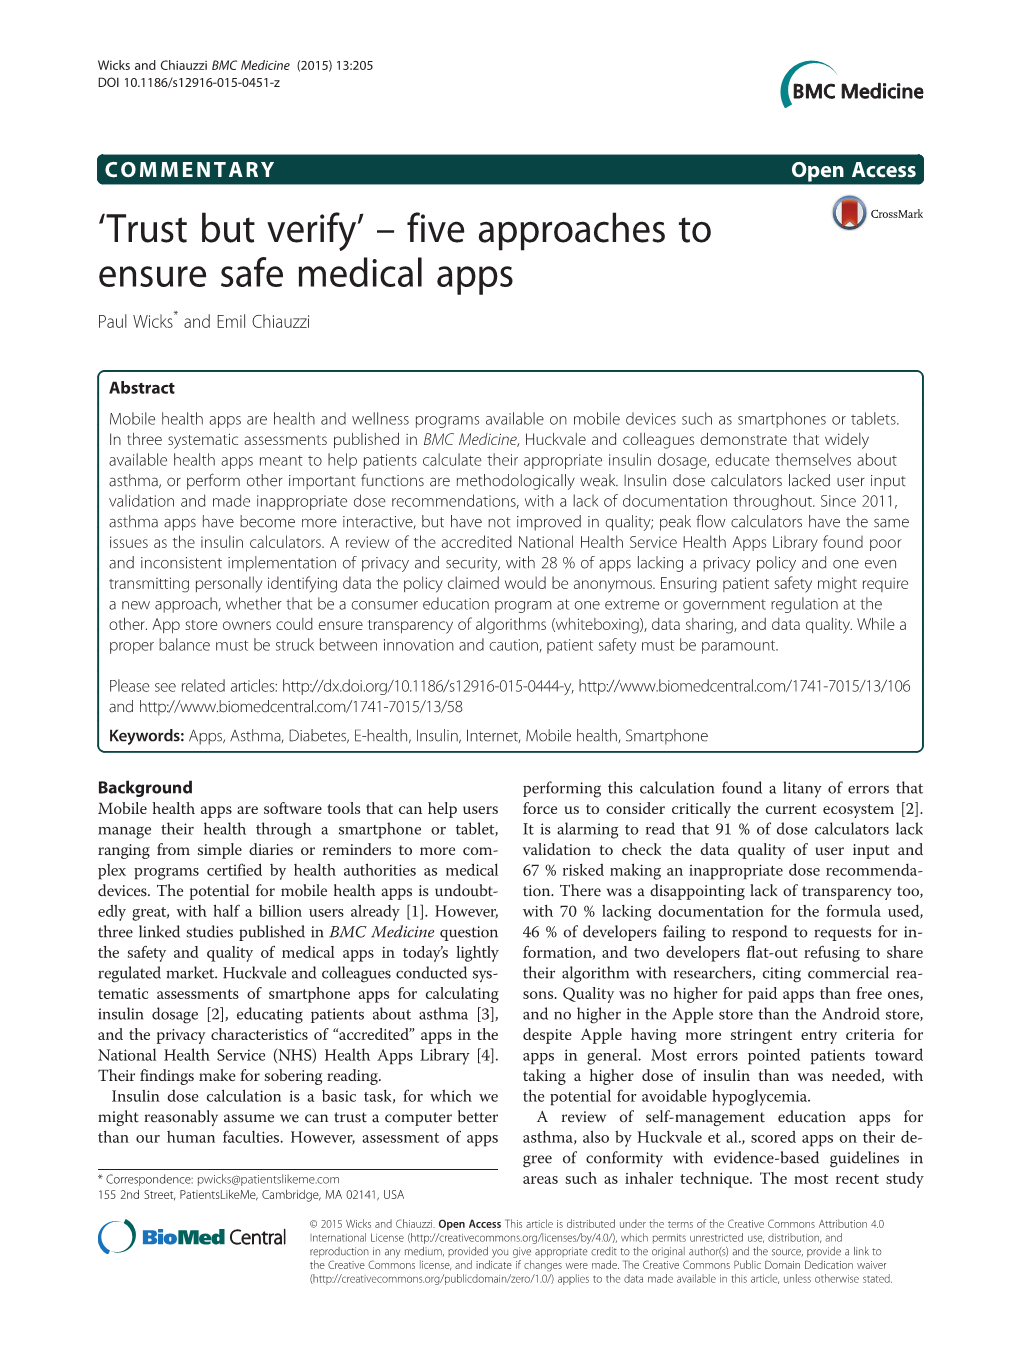 'Trust but Verify' – Five Approaches to Ensure Safe Medical Apps